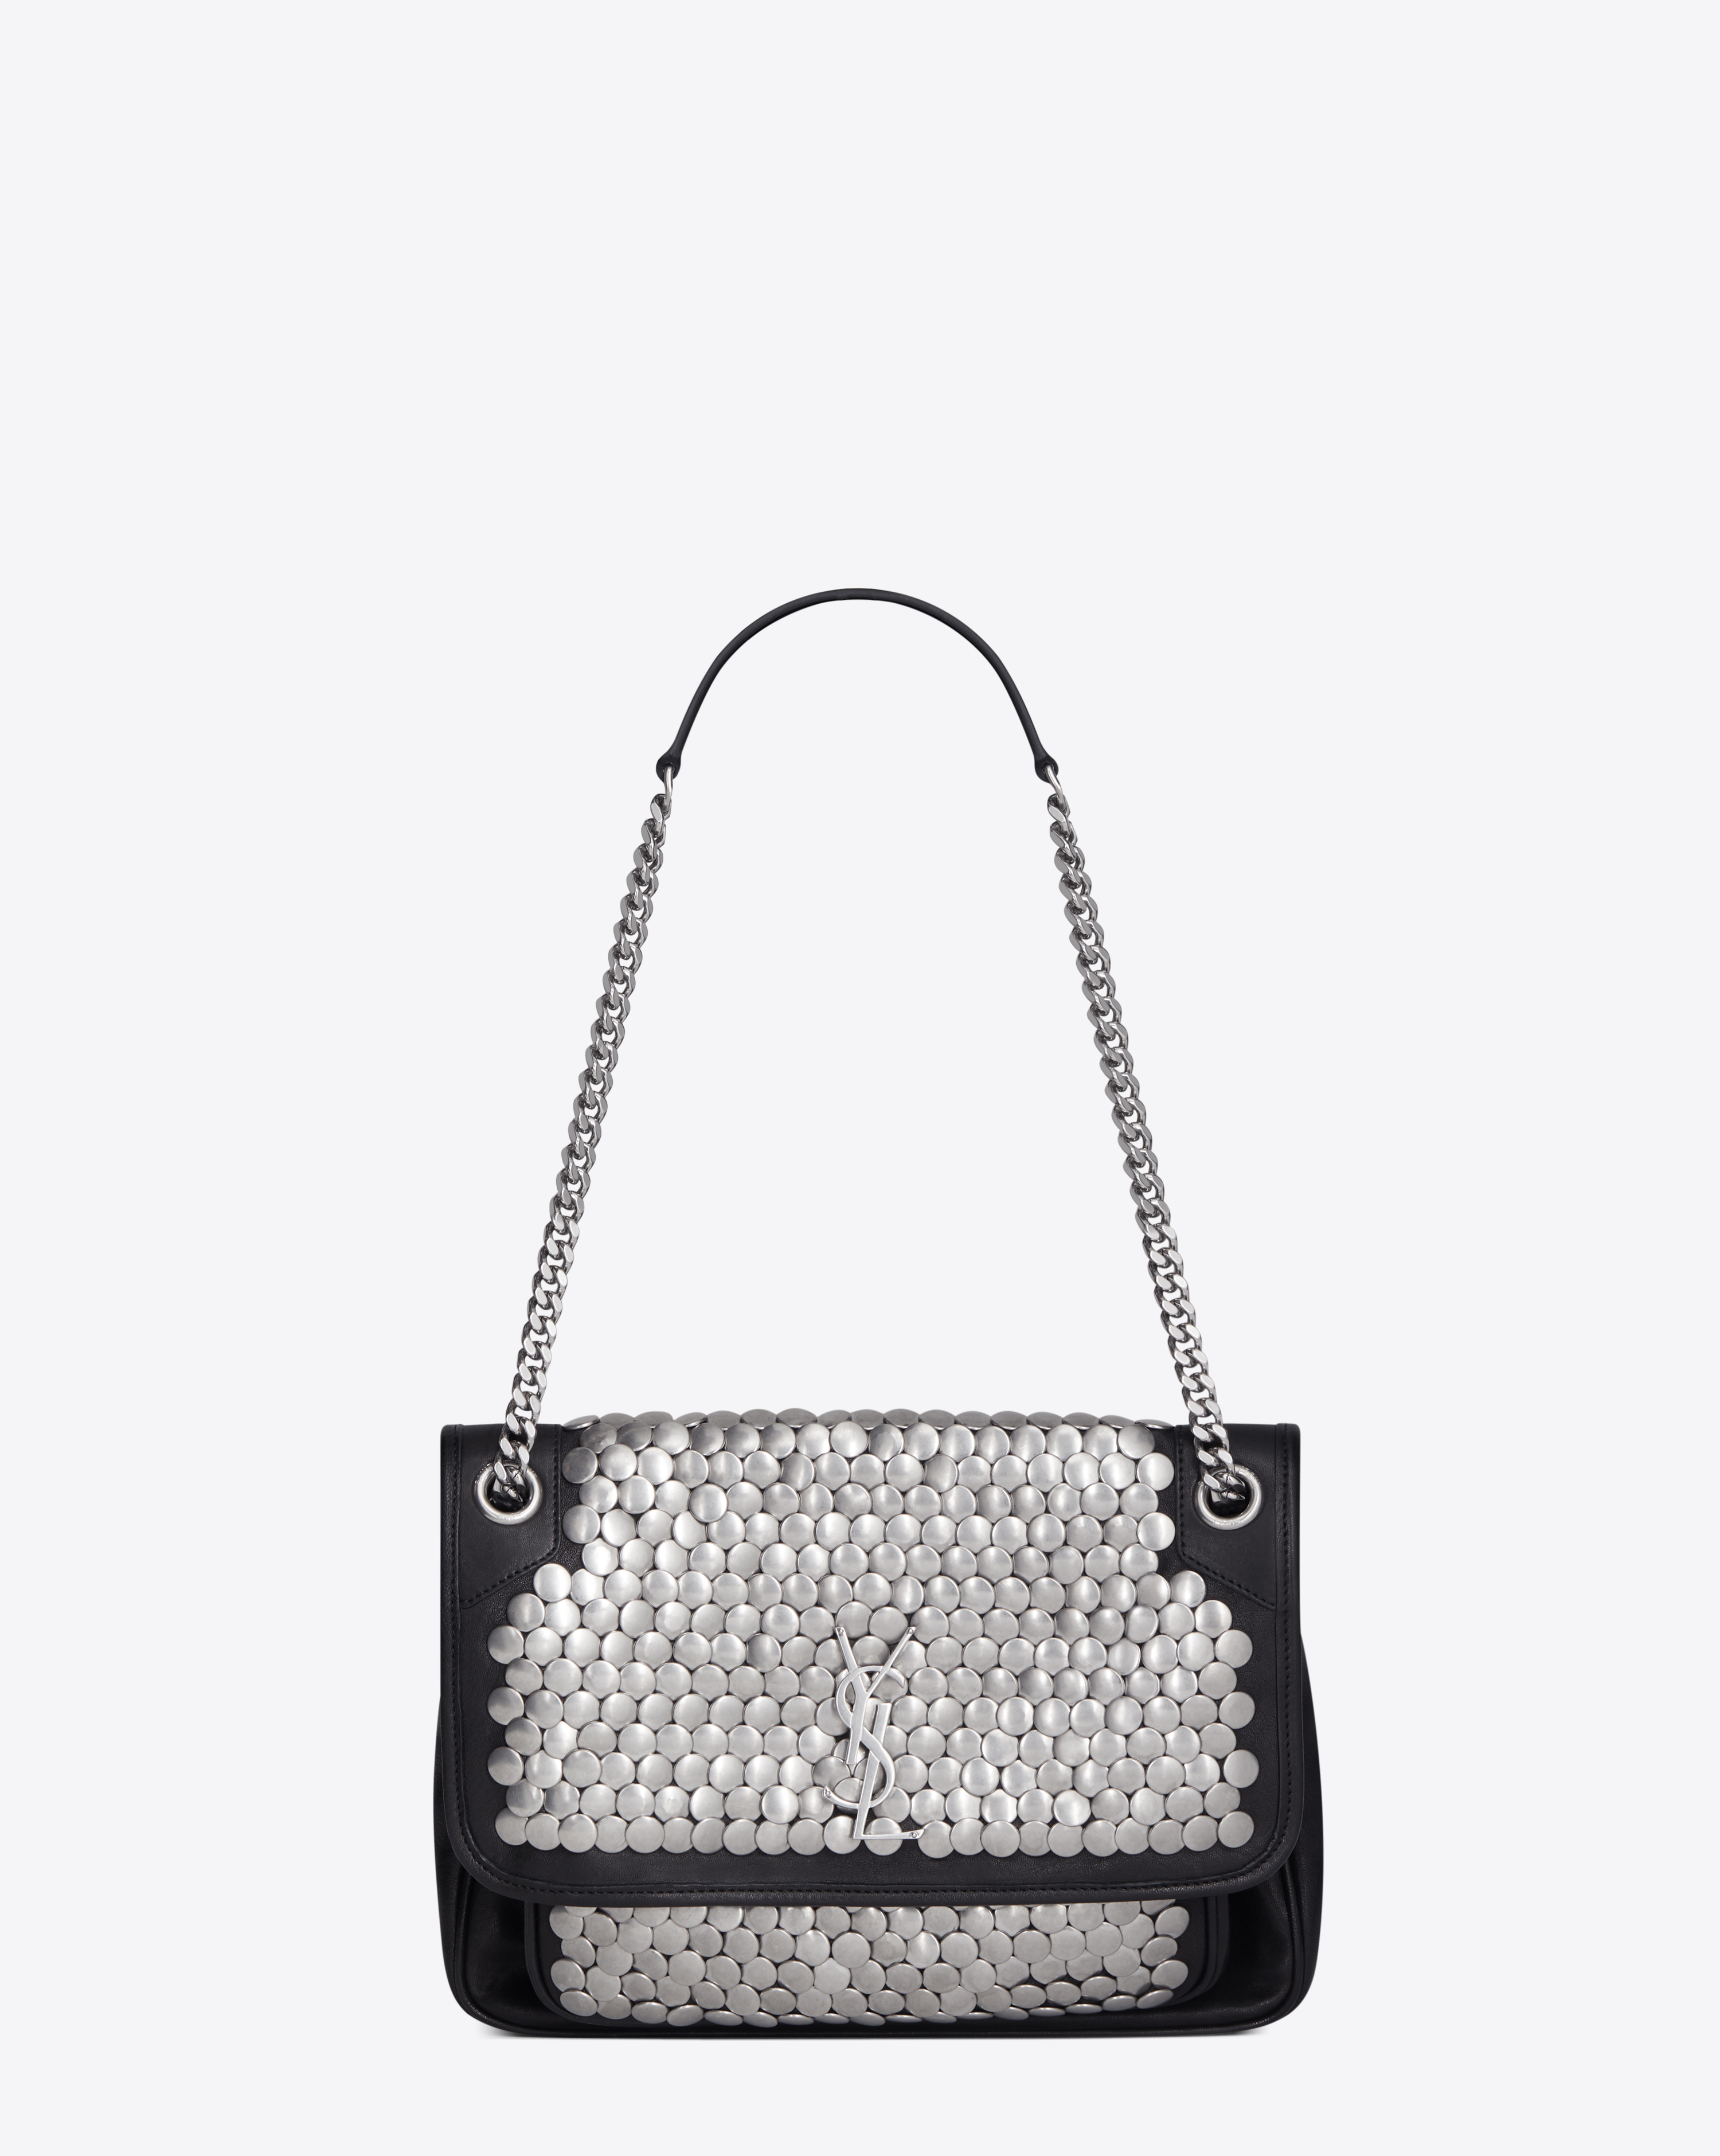 28 Best Chain Bags Accessorize With—From Ultra-Classics to Modern Remixes